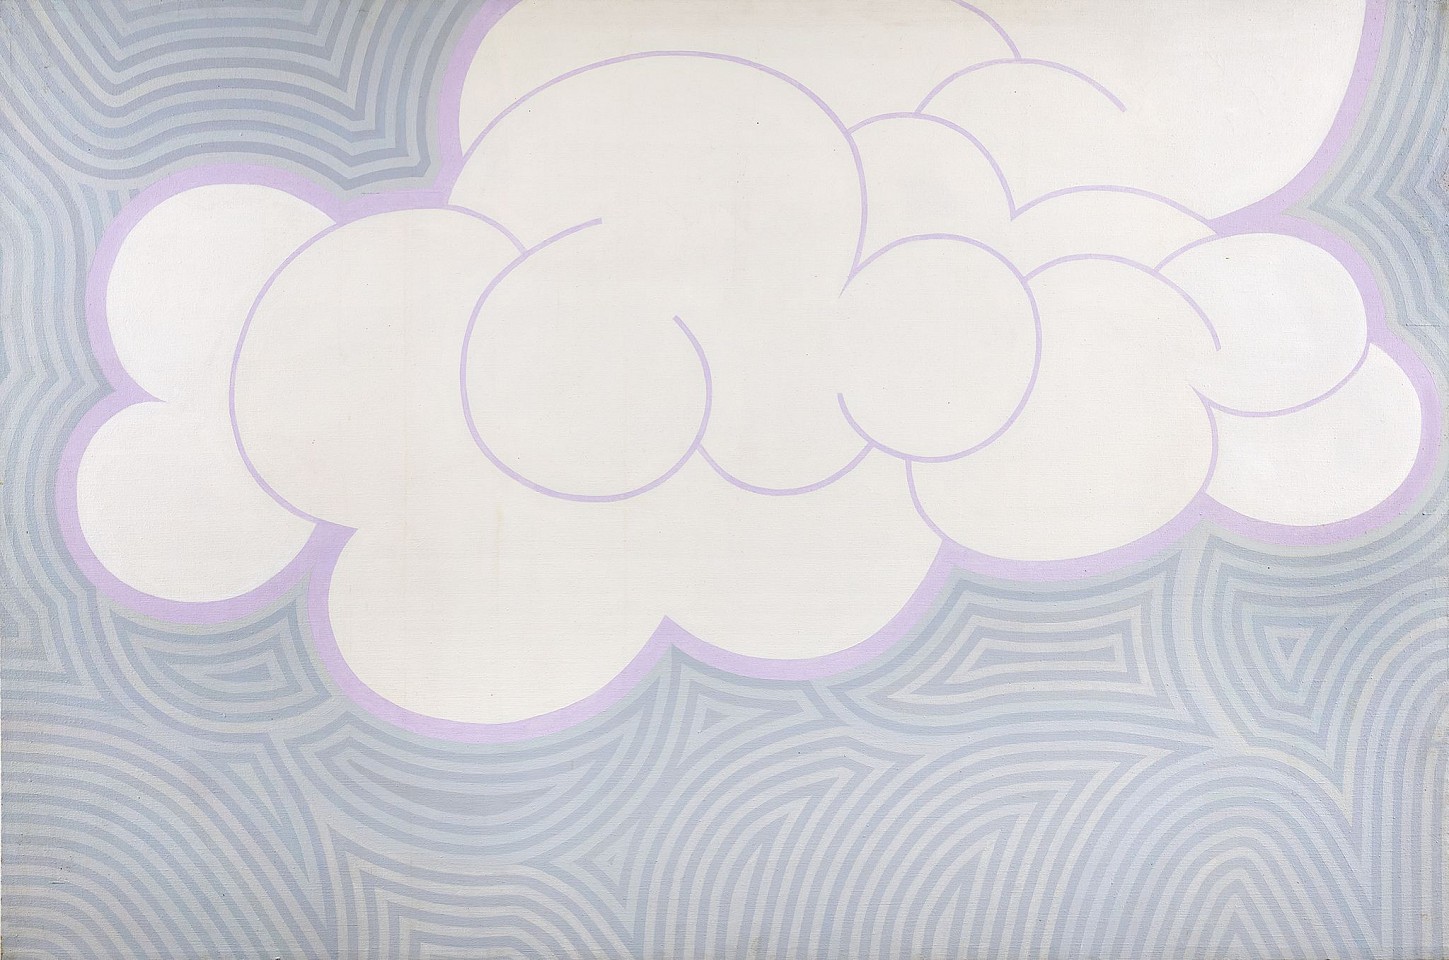 Mary Dill Henry, Untitled (Clouds) | SOLD, 1971-72
Acrylic on canvas, 48 x 72 in. (121.9 x 182.9 cm)
MHEN-00100